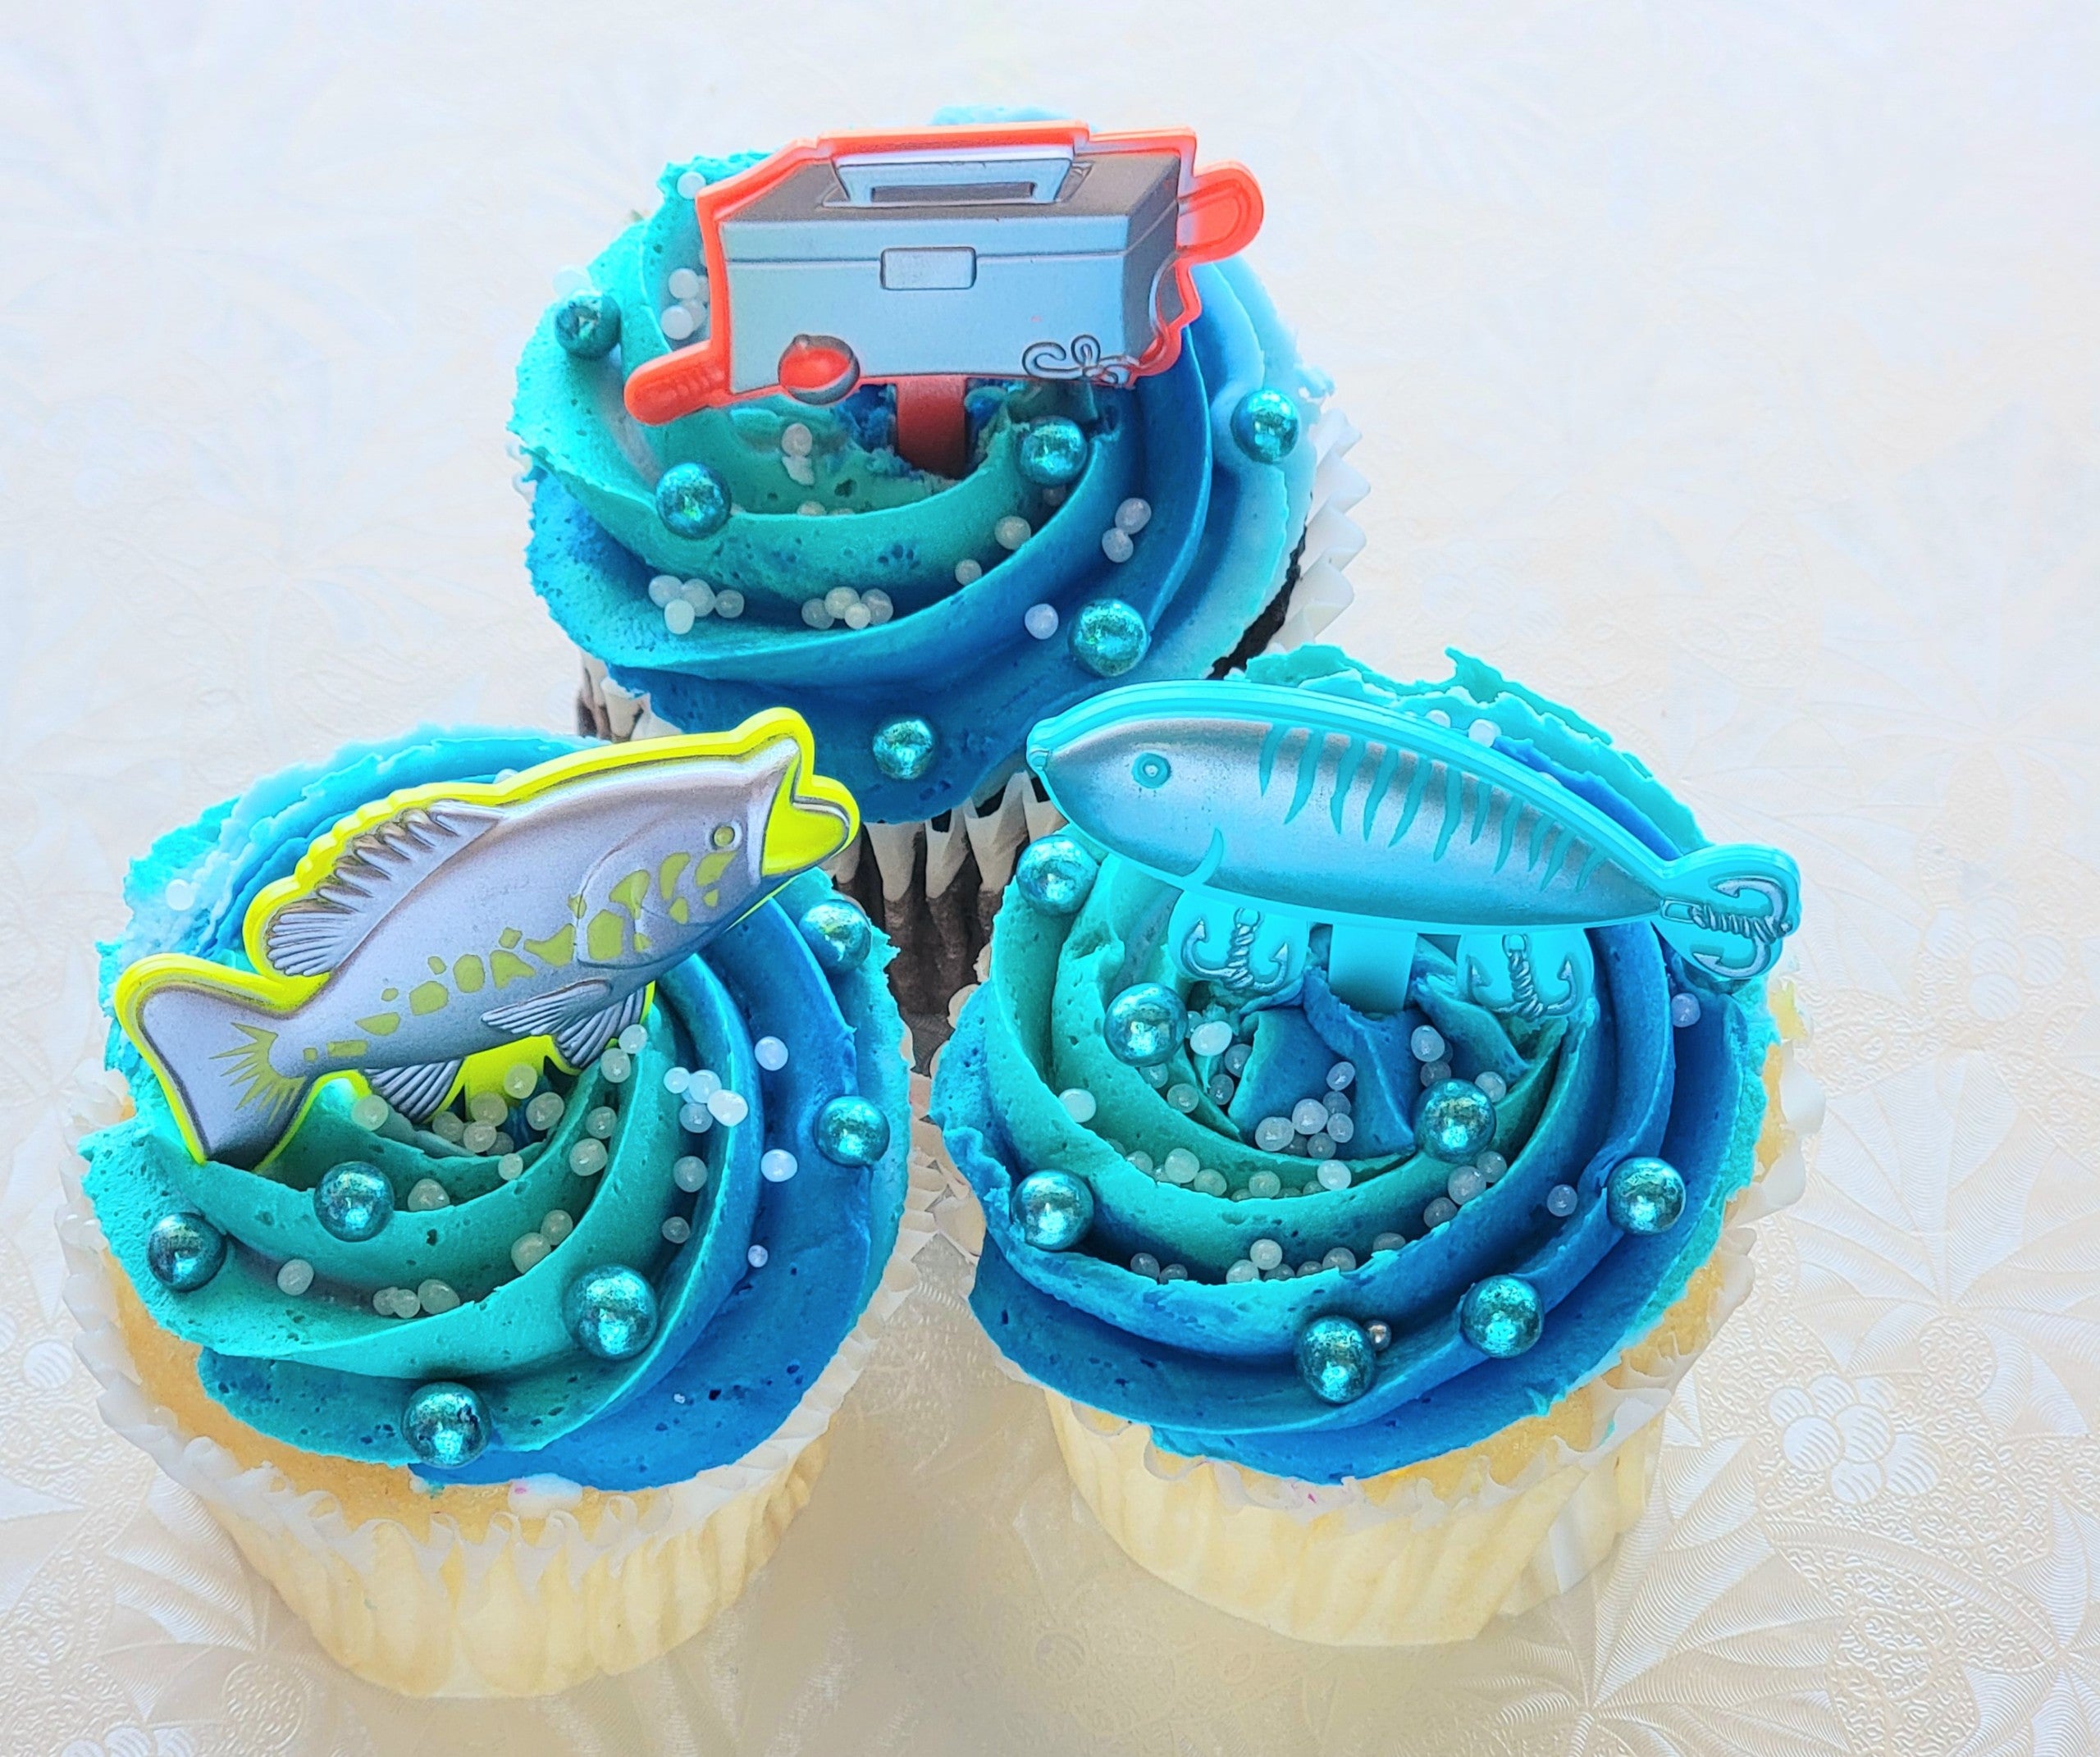 Gone Fishing Cupcakes - Three Kids and a Fish